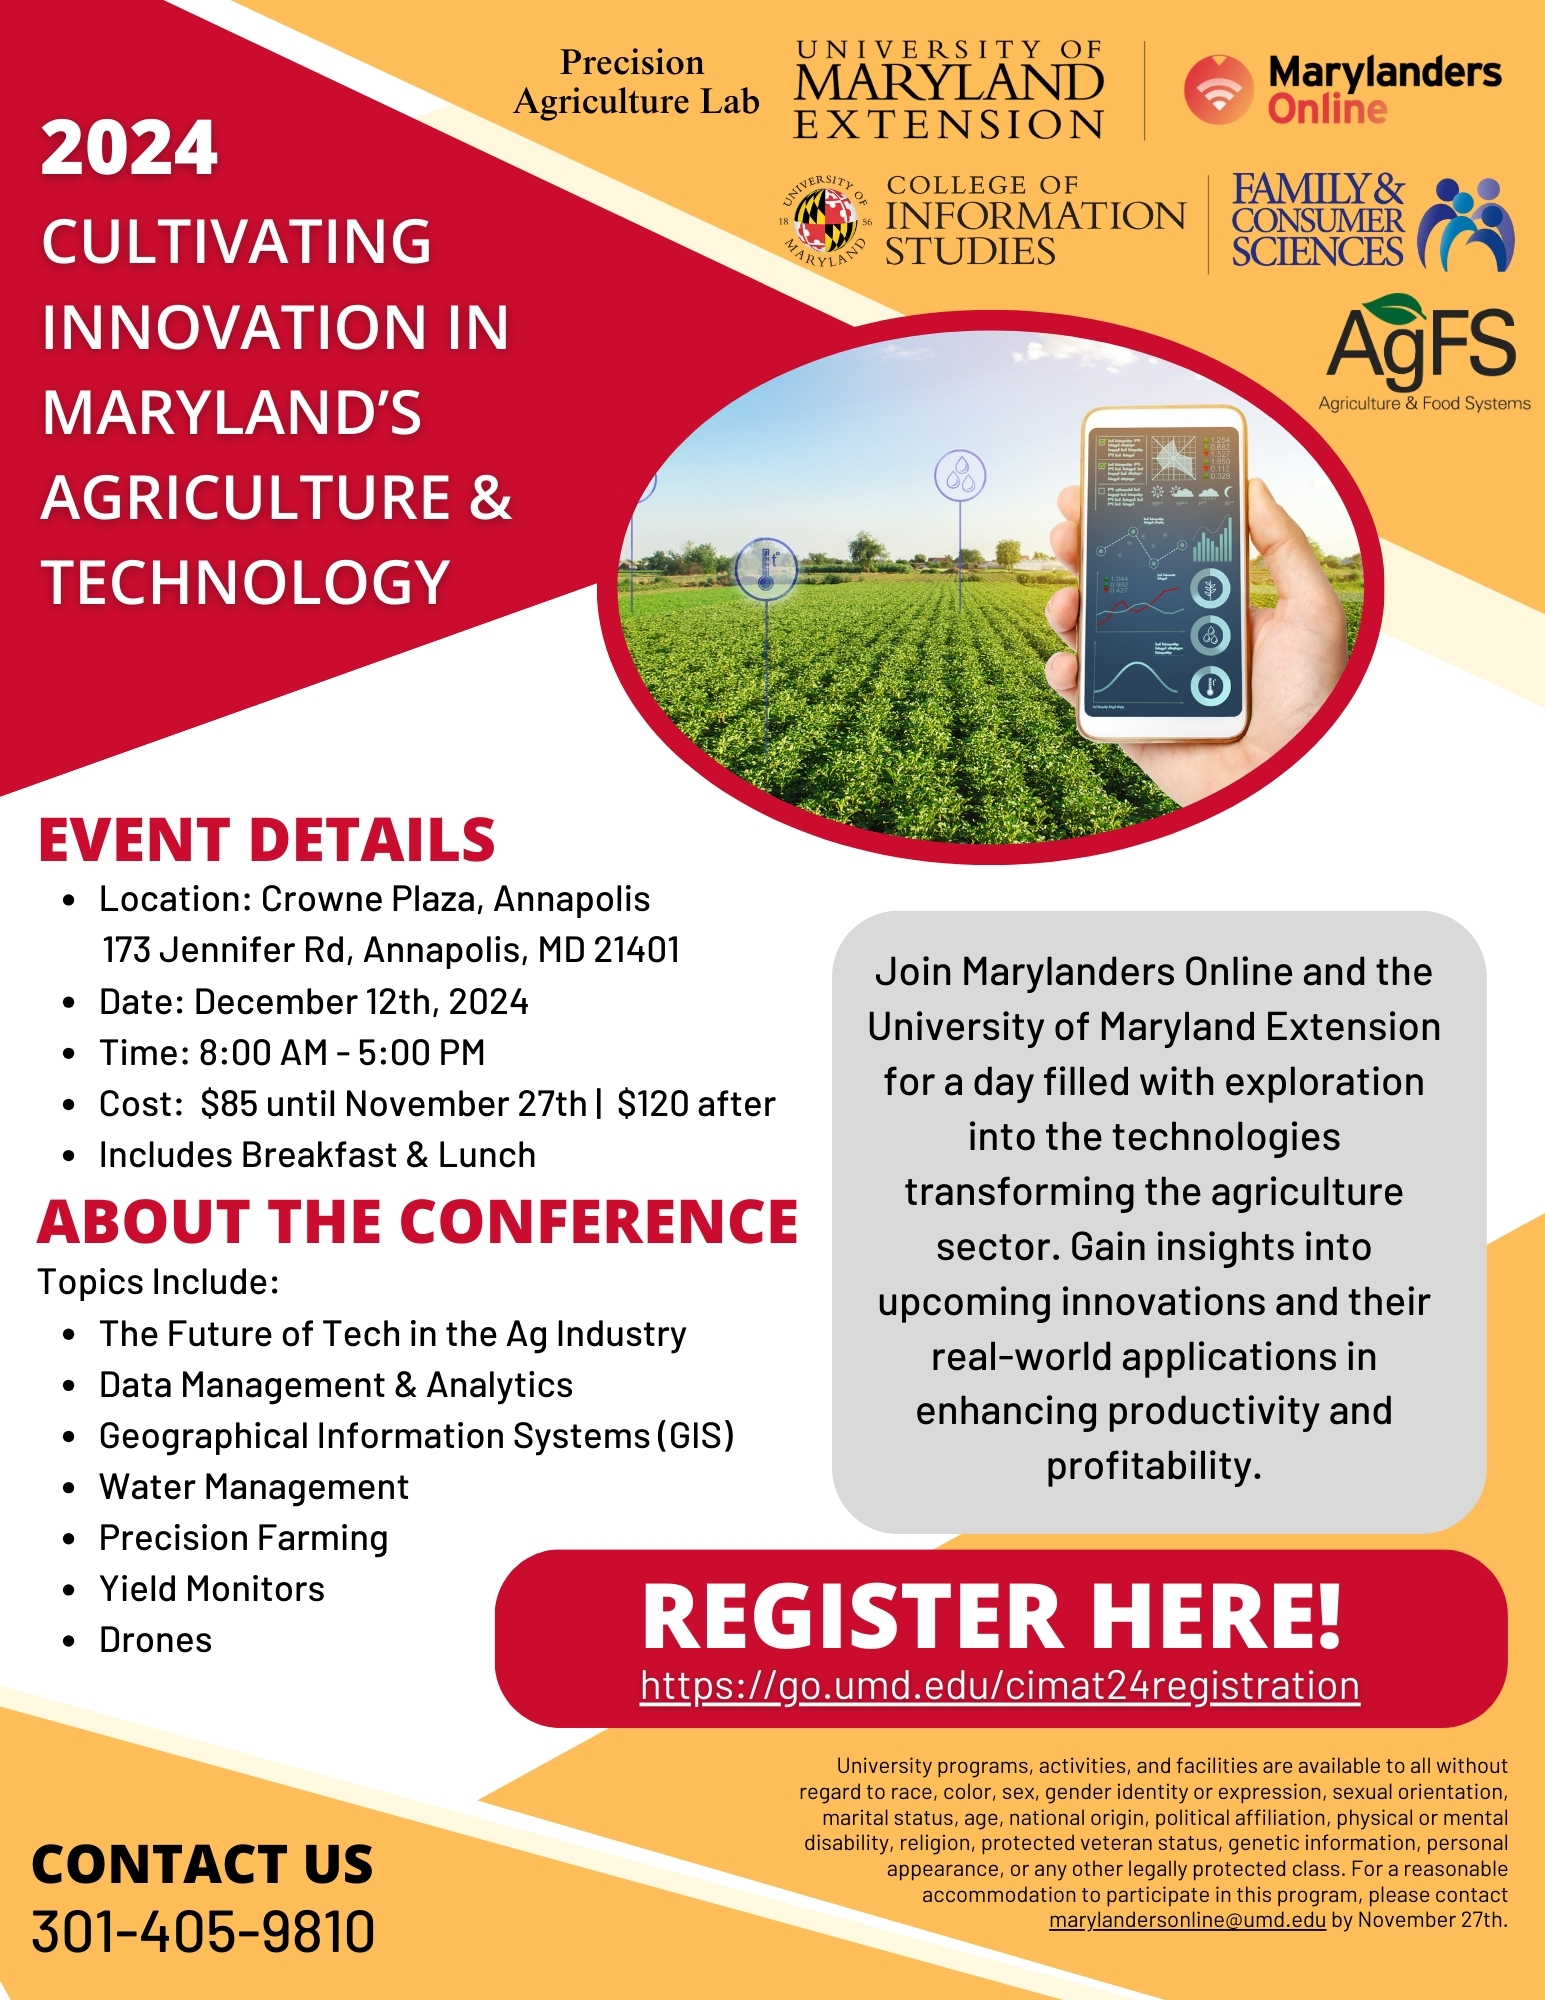 2024 Cultivating Innovation in Maryland’s Agriculture and Technology Conference Flyer